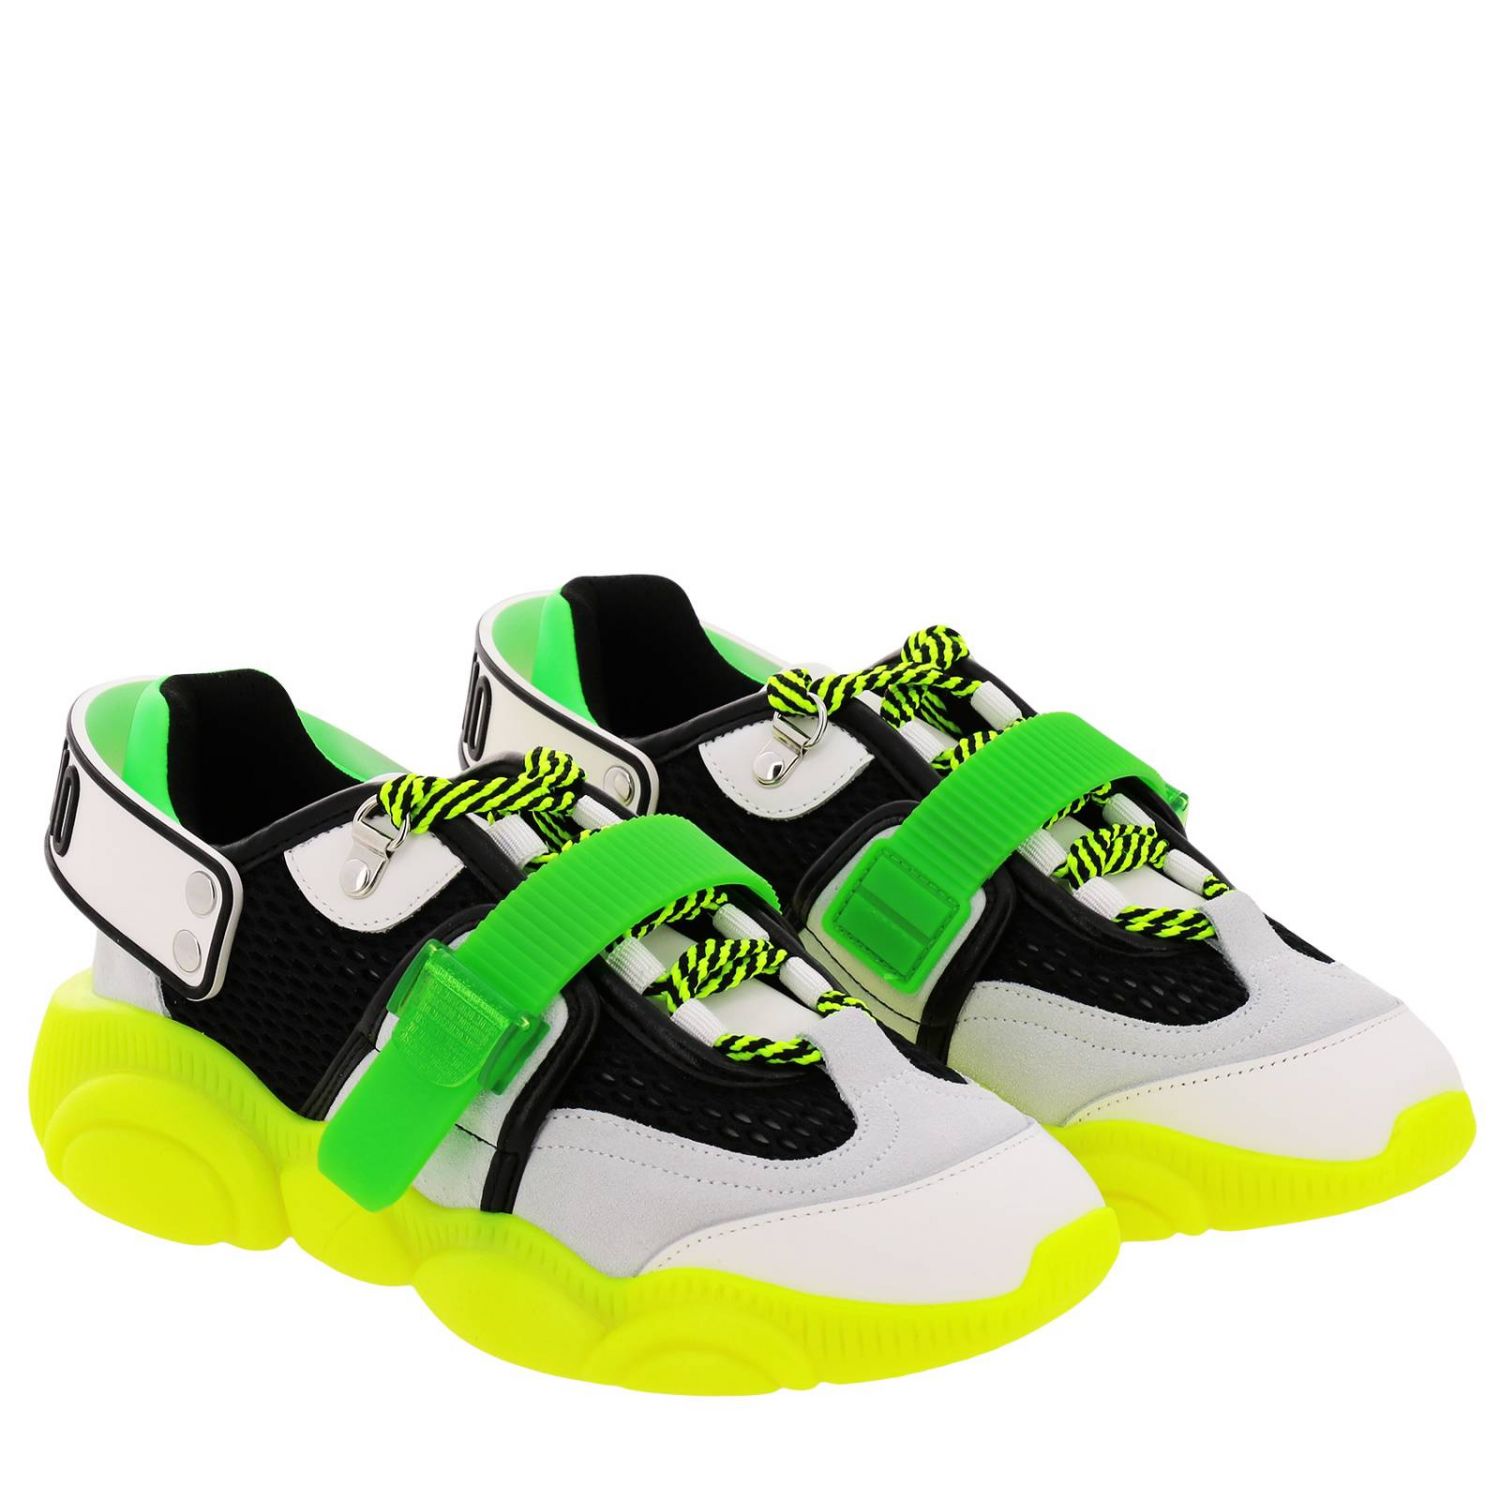 moschino fluo teddy sneakers